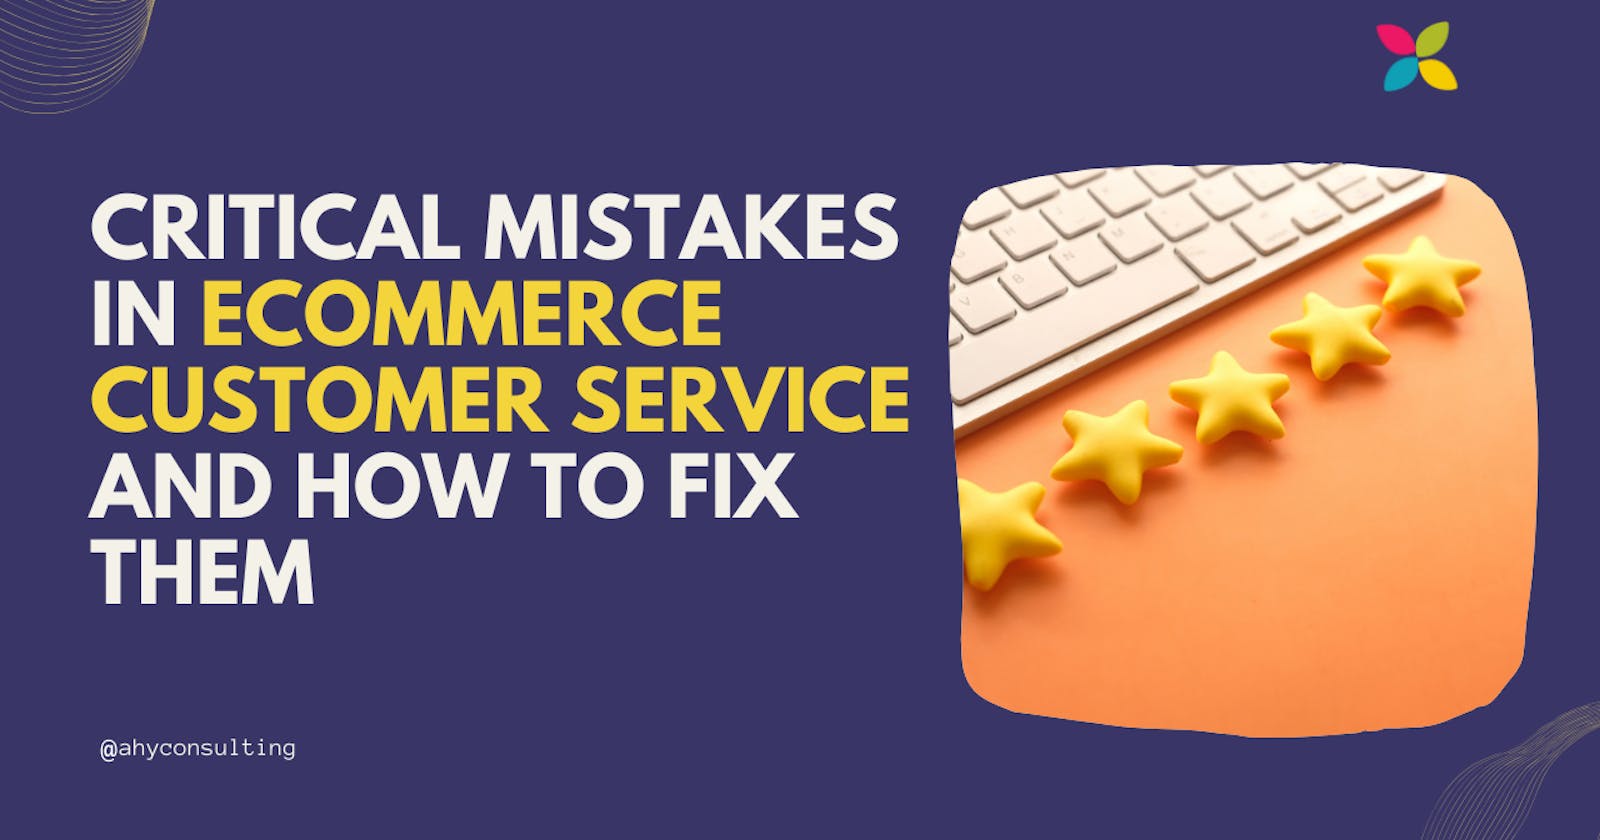 Critical Mistakes in eCommerce Customer Service and How to Fix Them